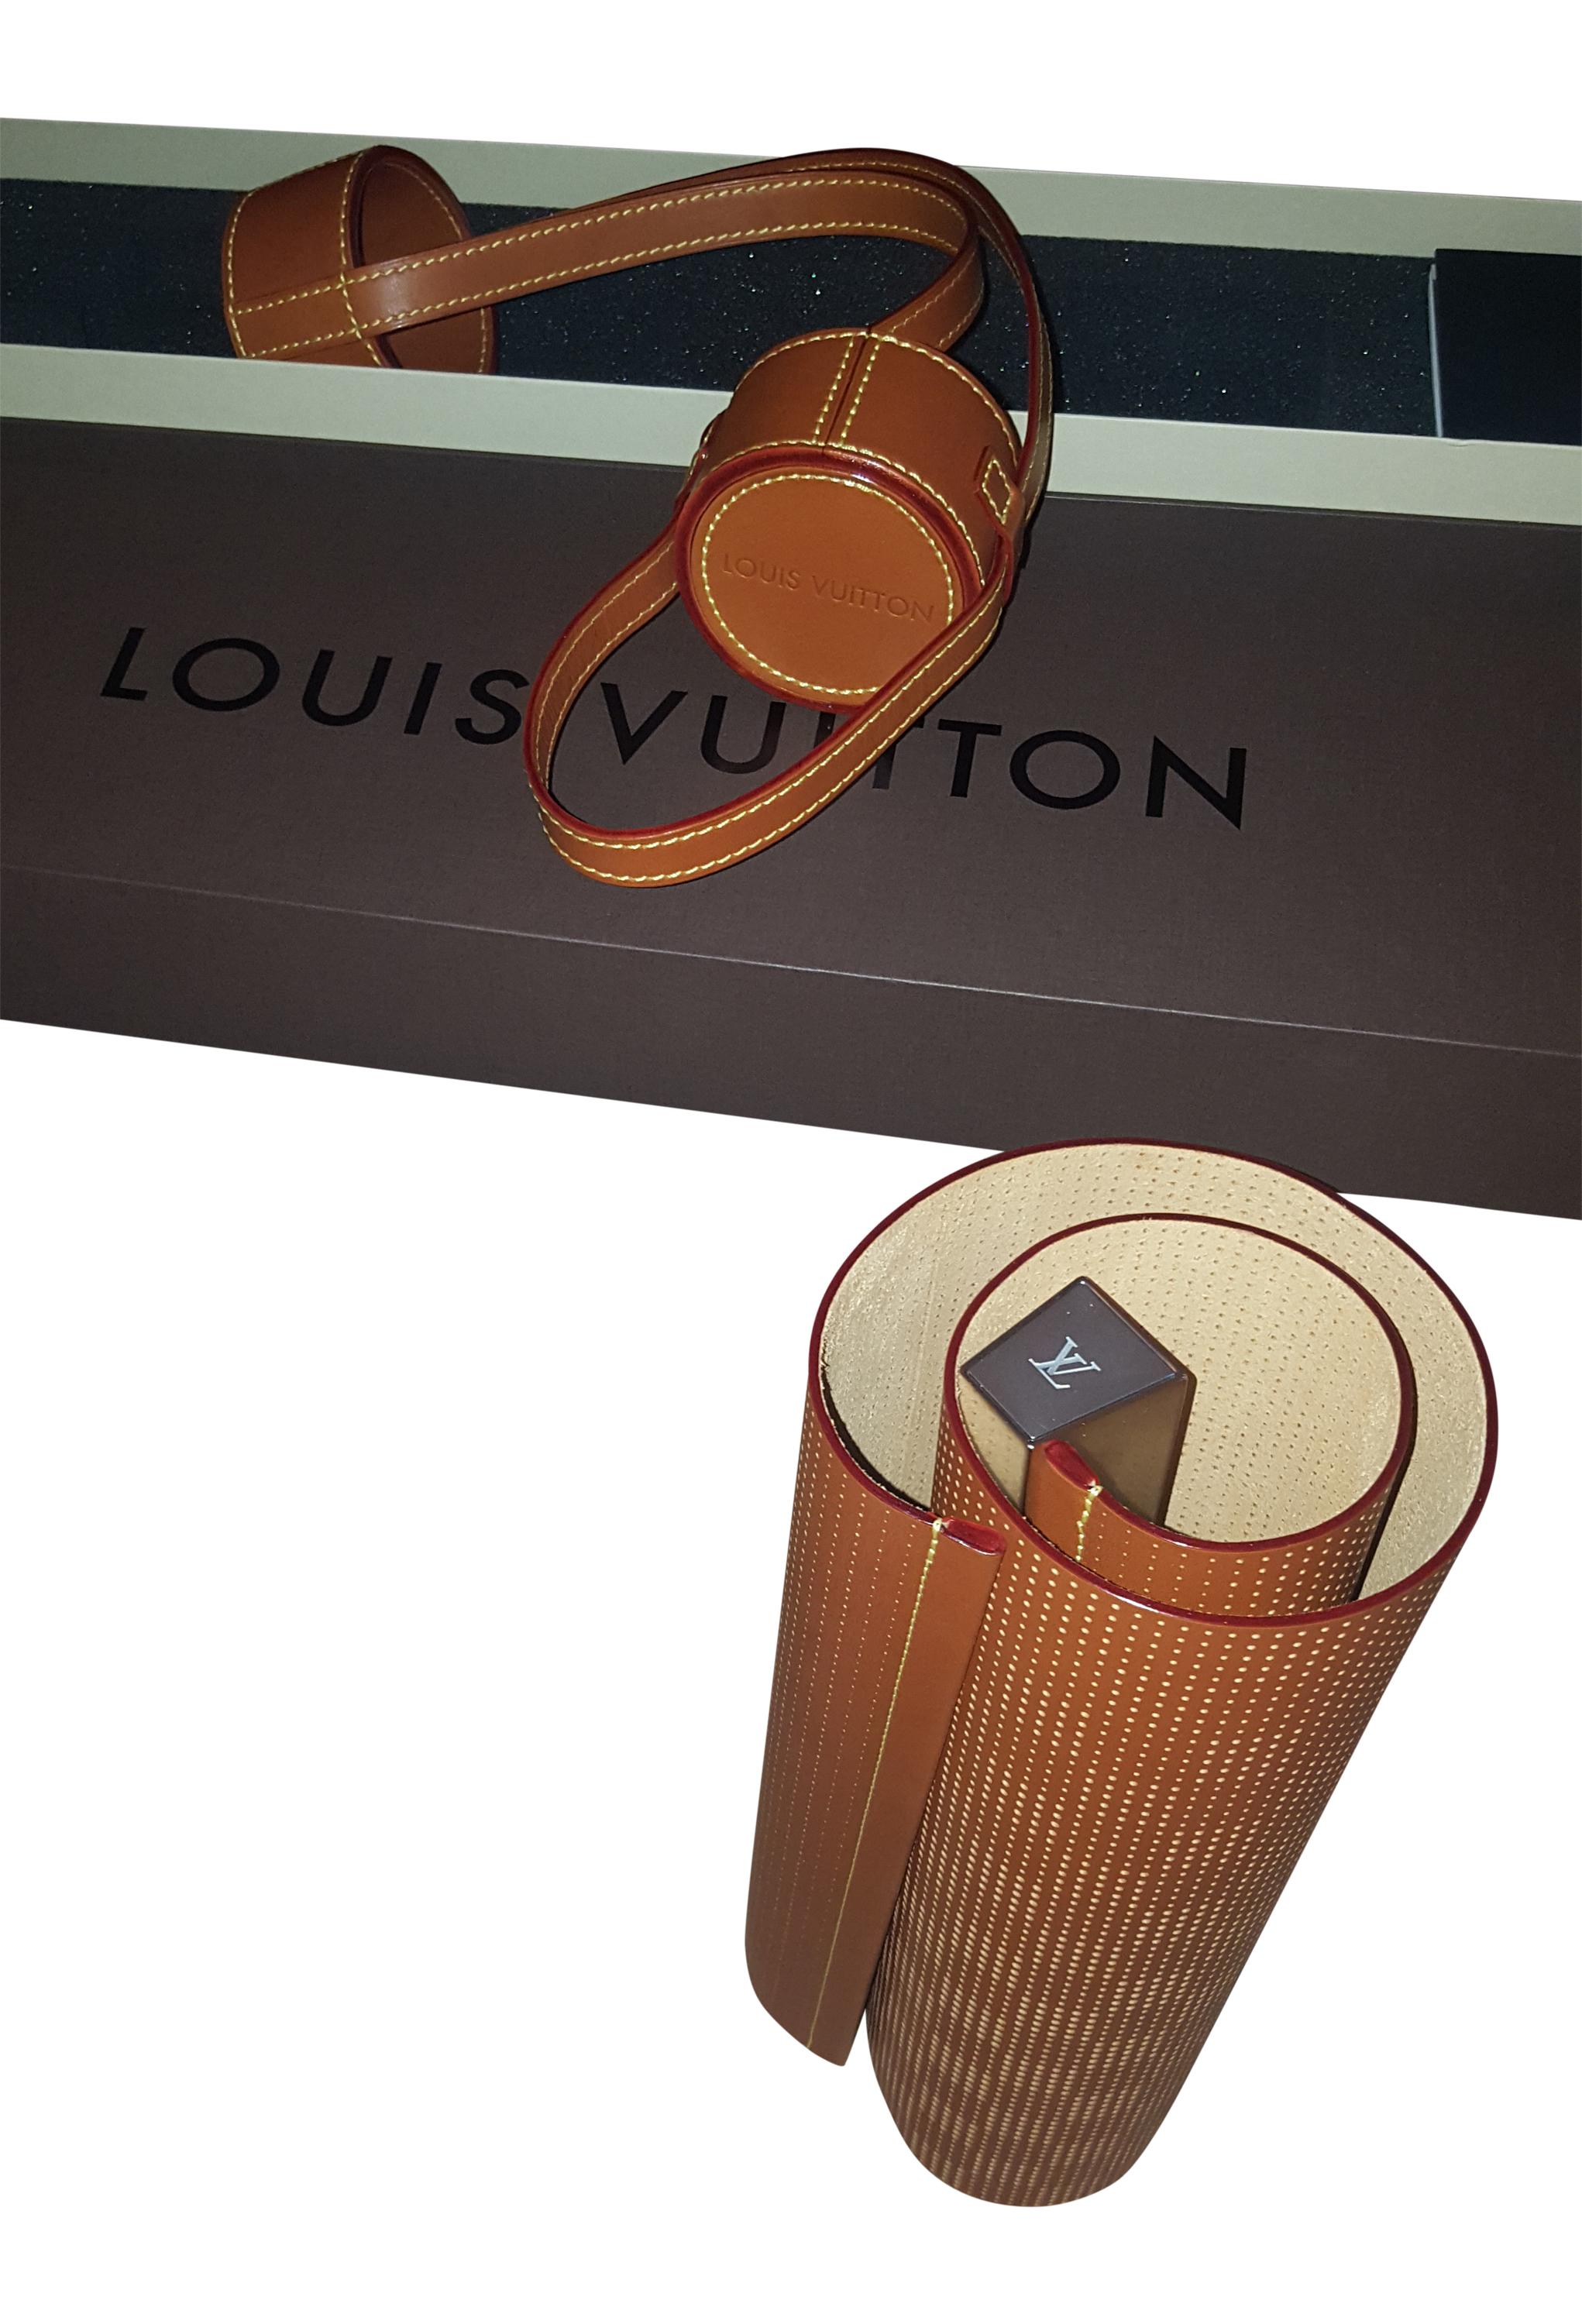 Modern Louis Vuitton Surface Table Lamp 'Limited Edition by Nendo, Objets Nomades' For Sale